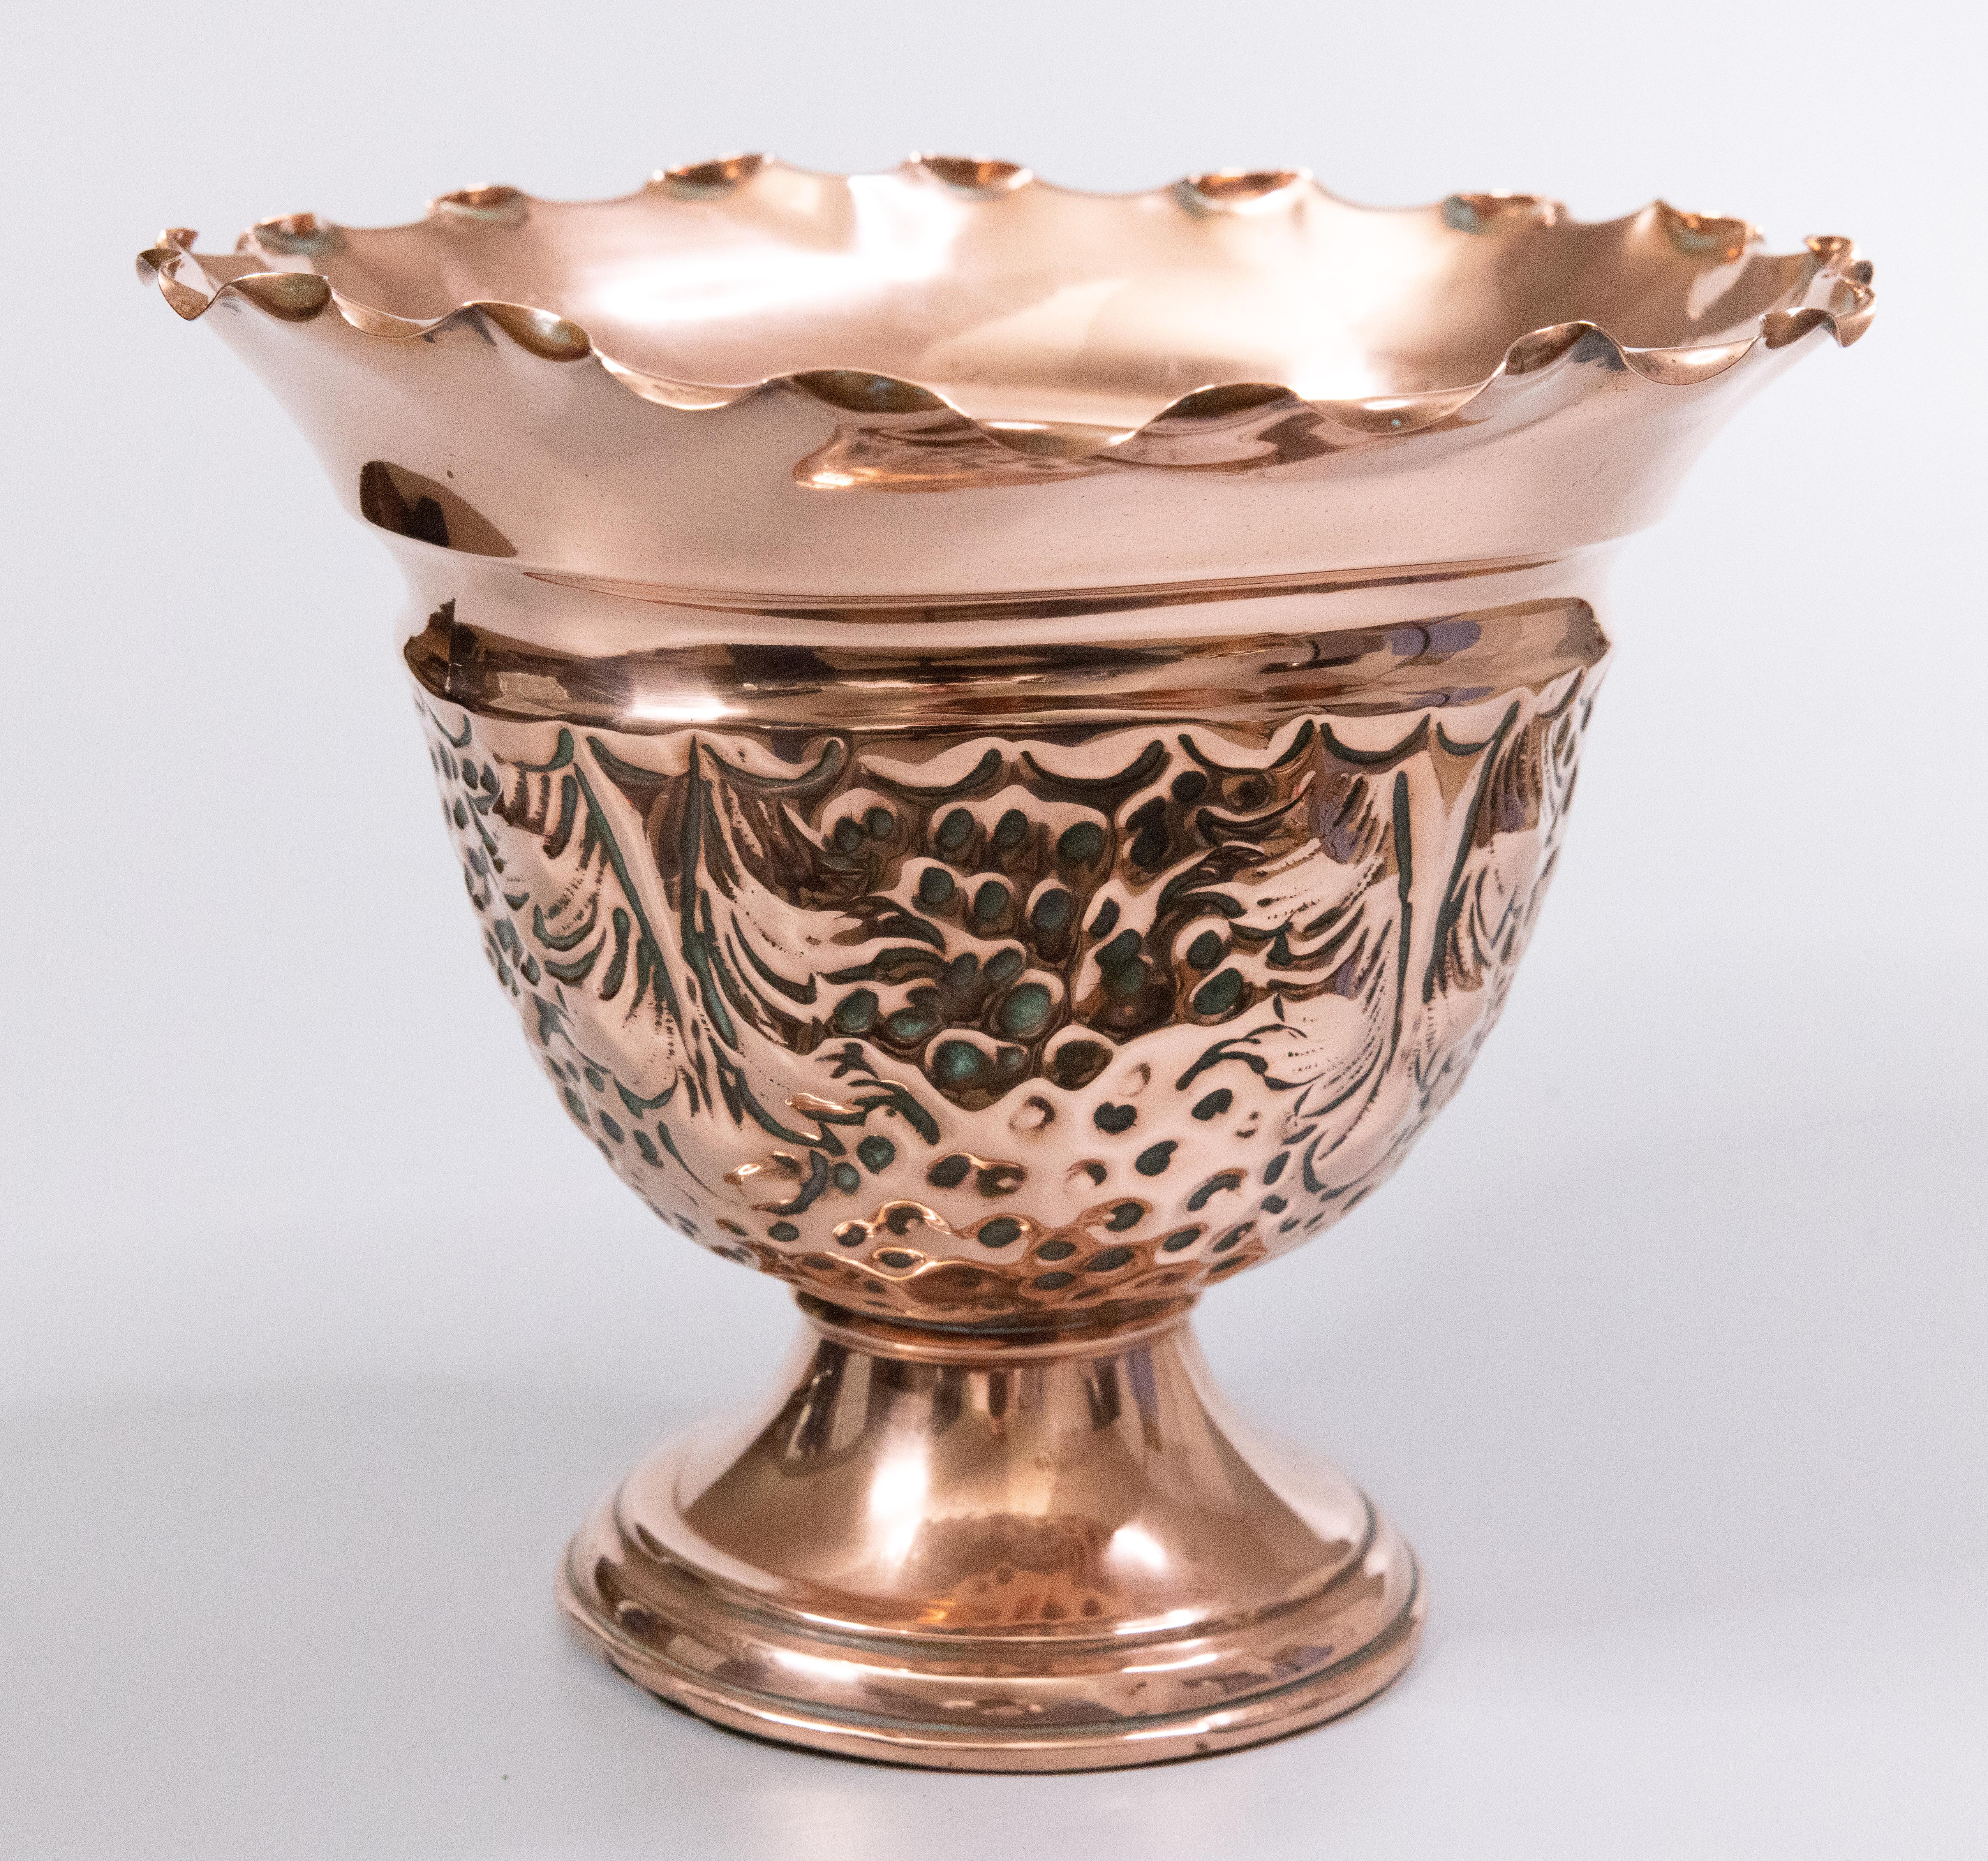 Antique Edwardian English Copper Cachepot Jardiniere Planter In Good Condition For Sale In Pearland, TX